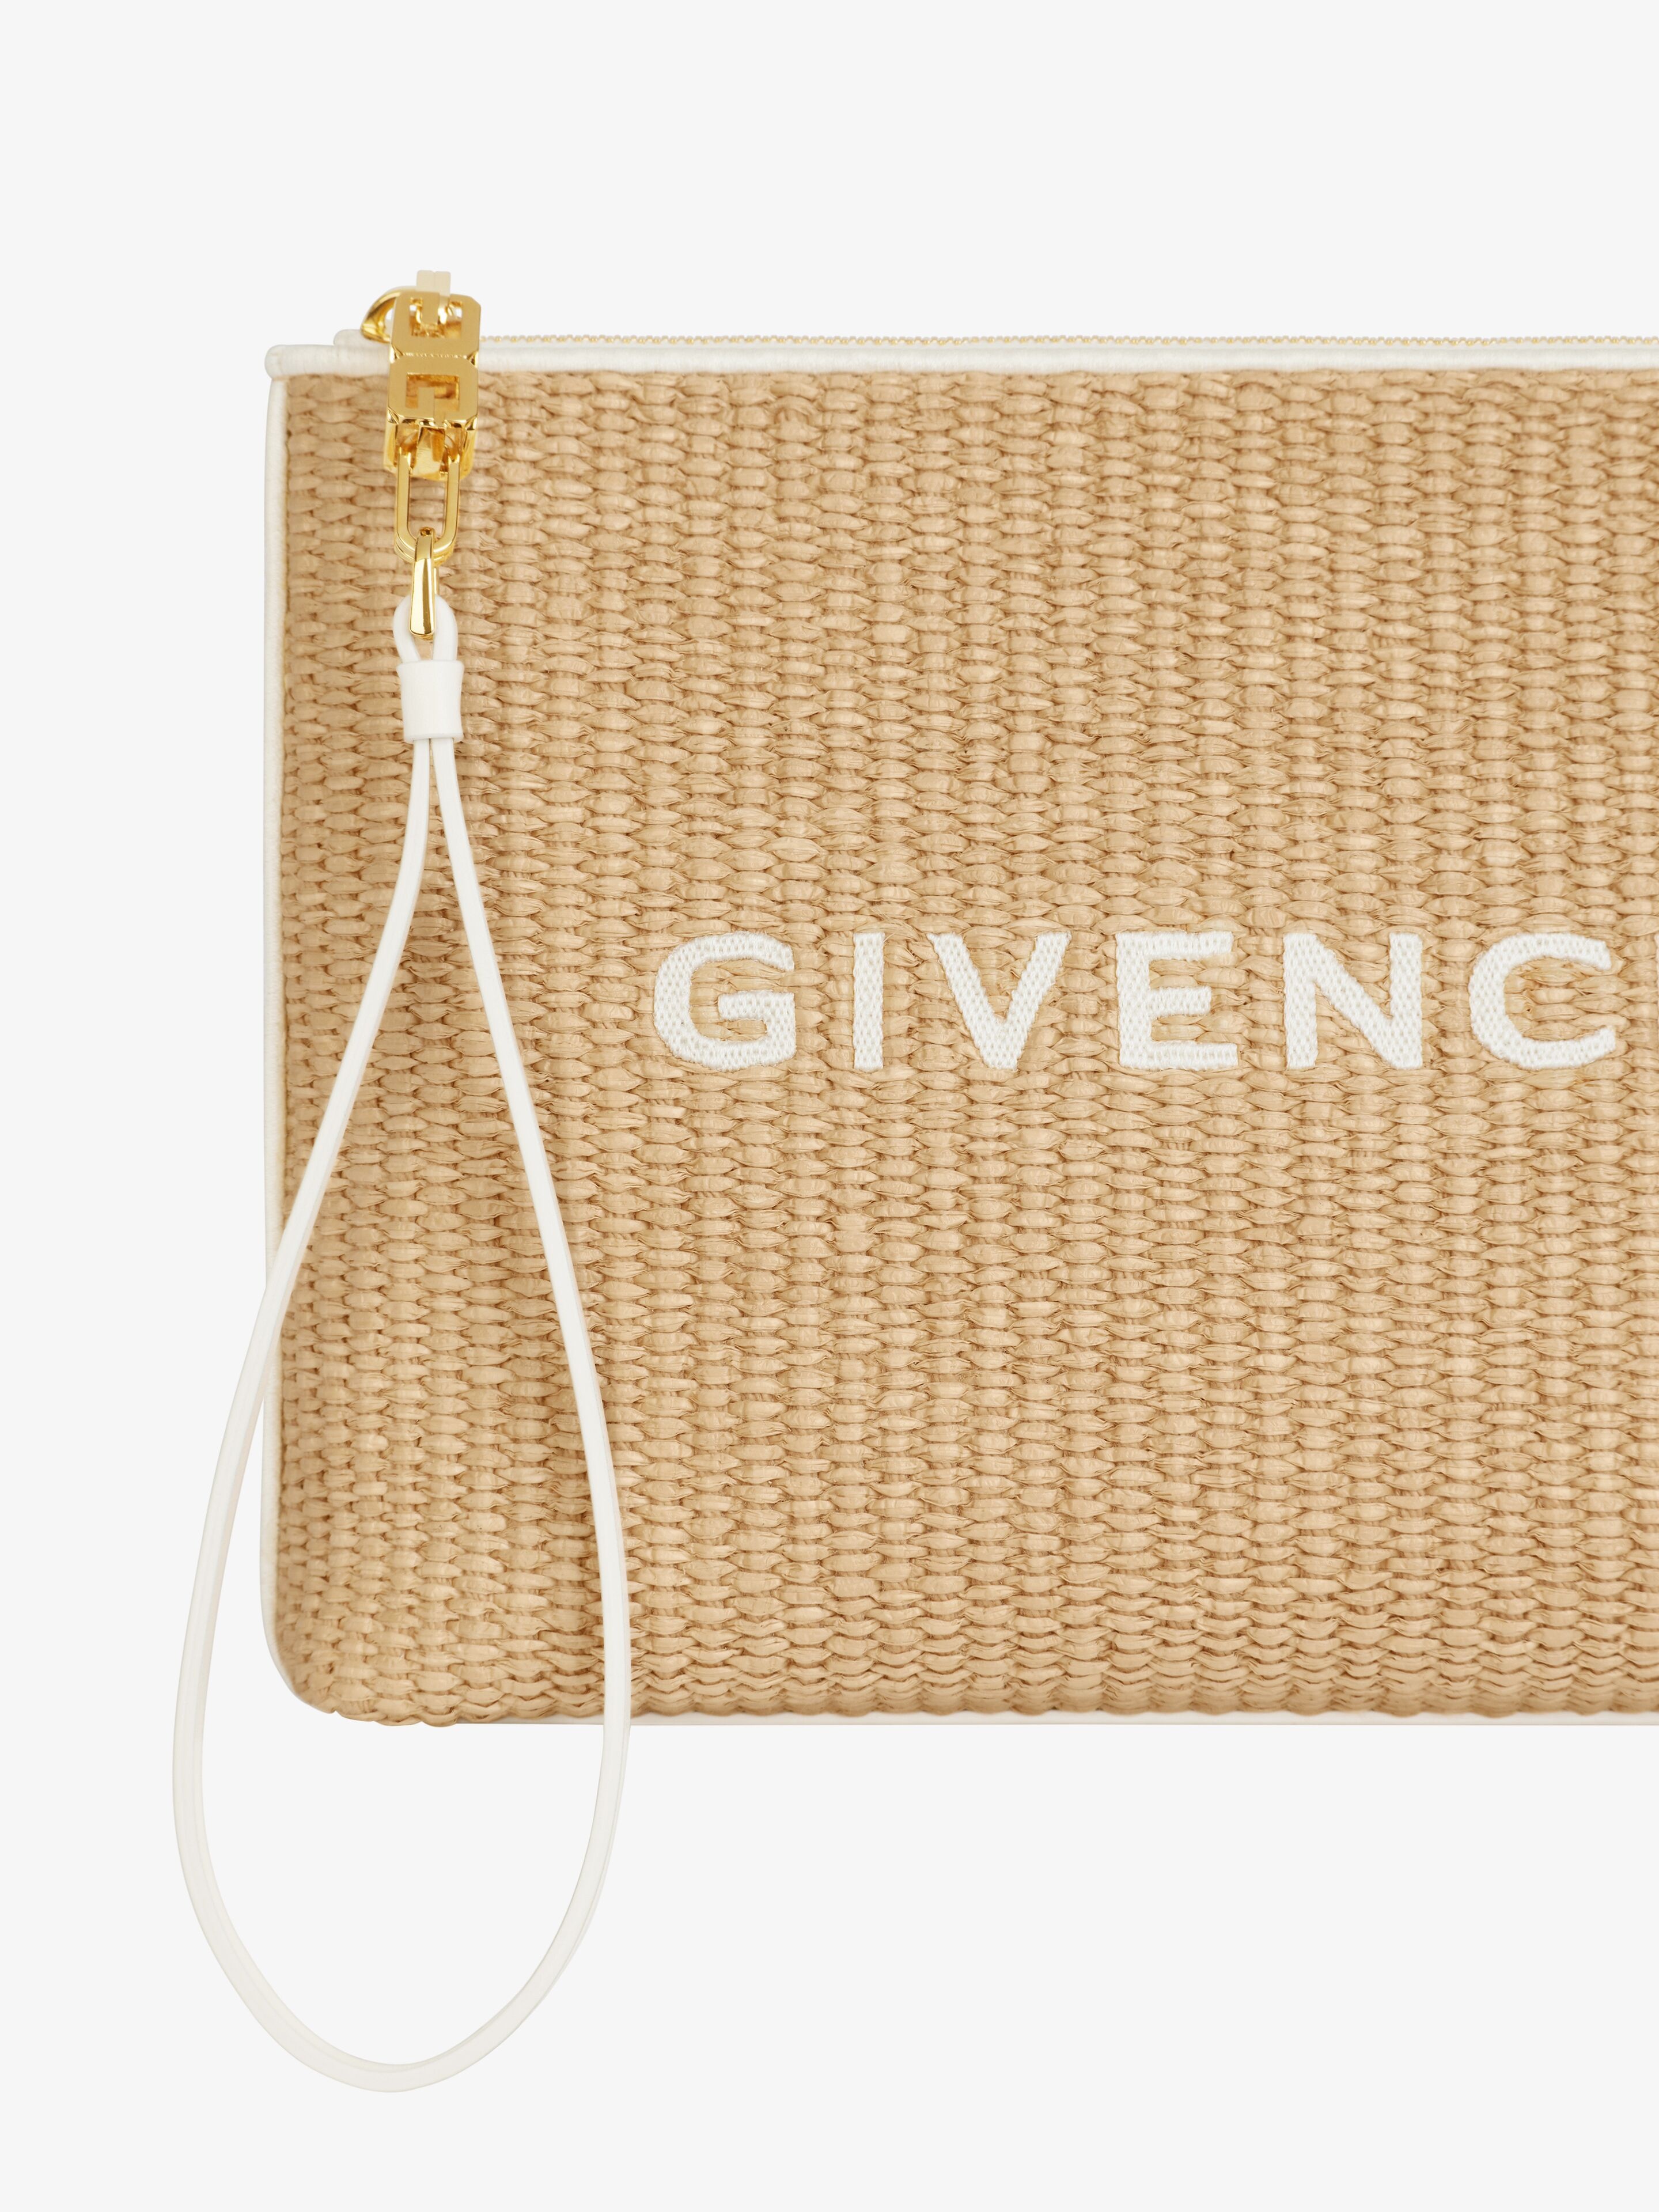 GIVENCHY TRAVEL POUCH IN RAFFIA - 4